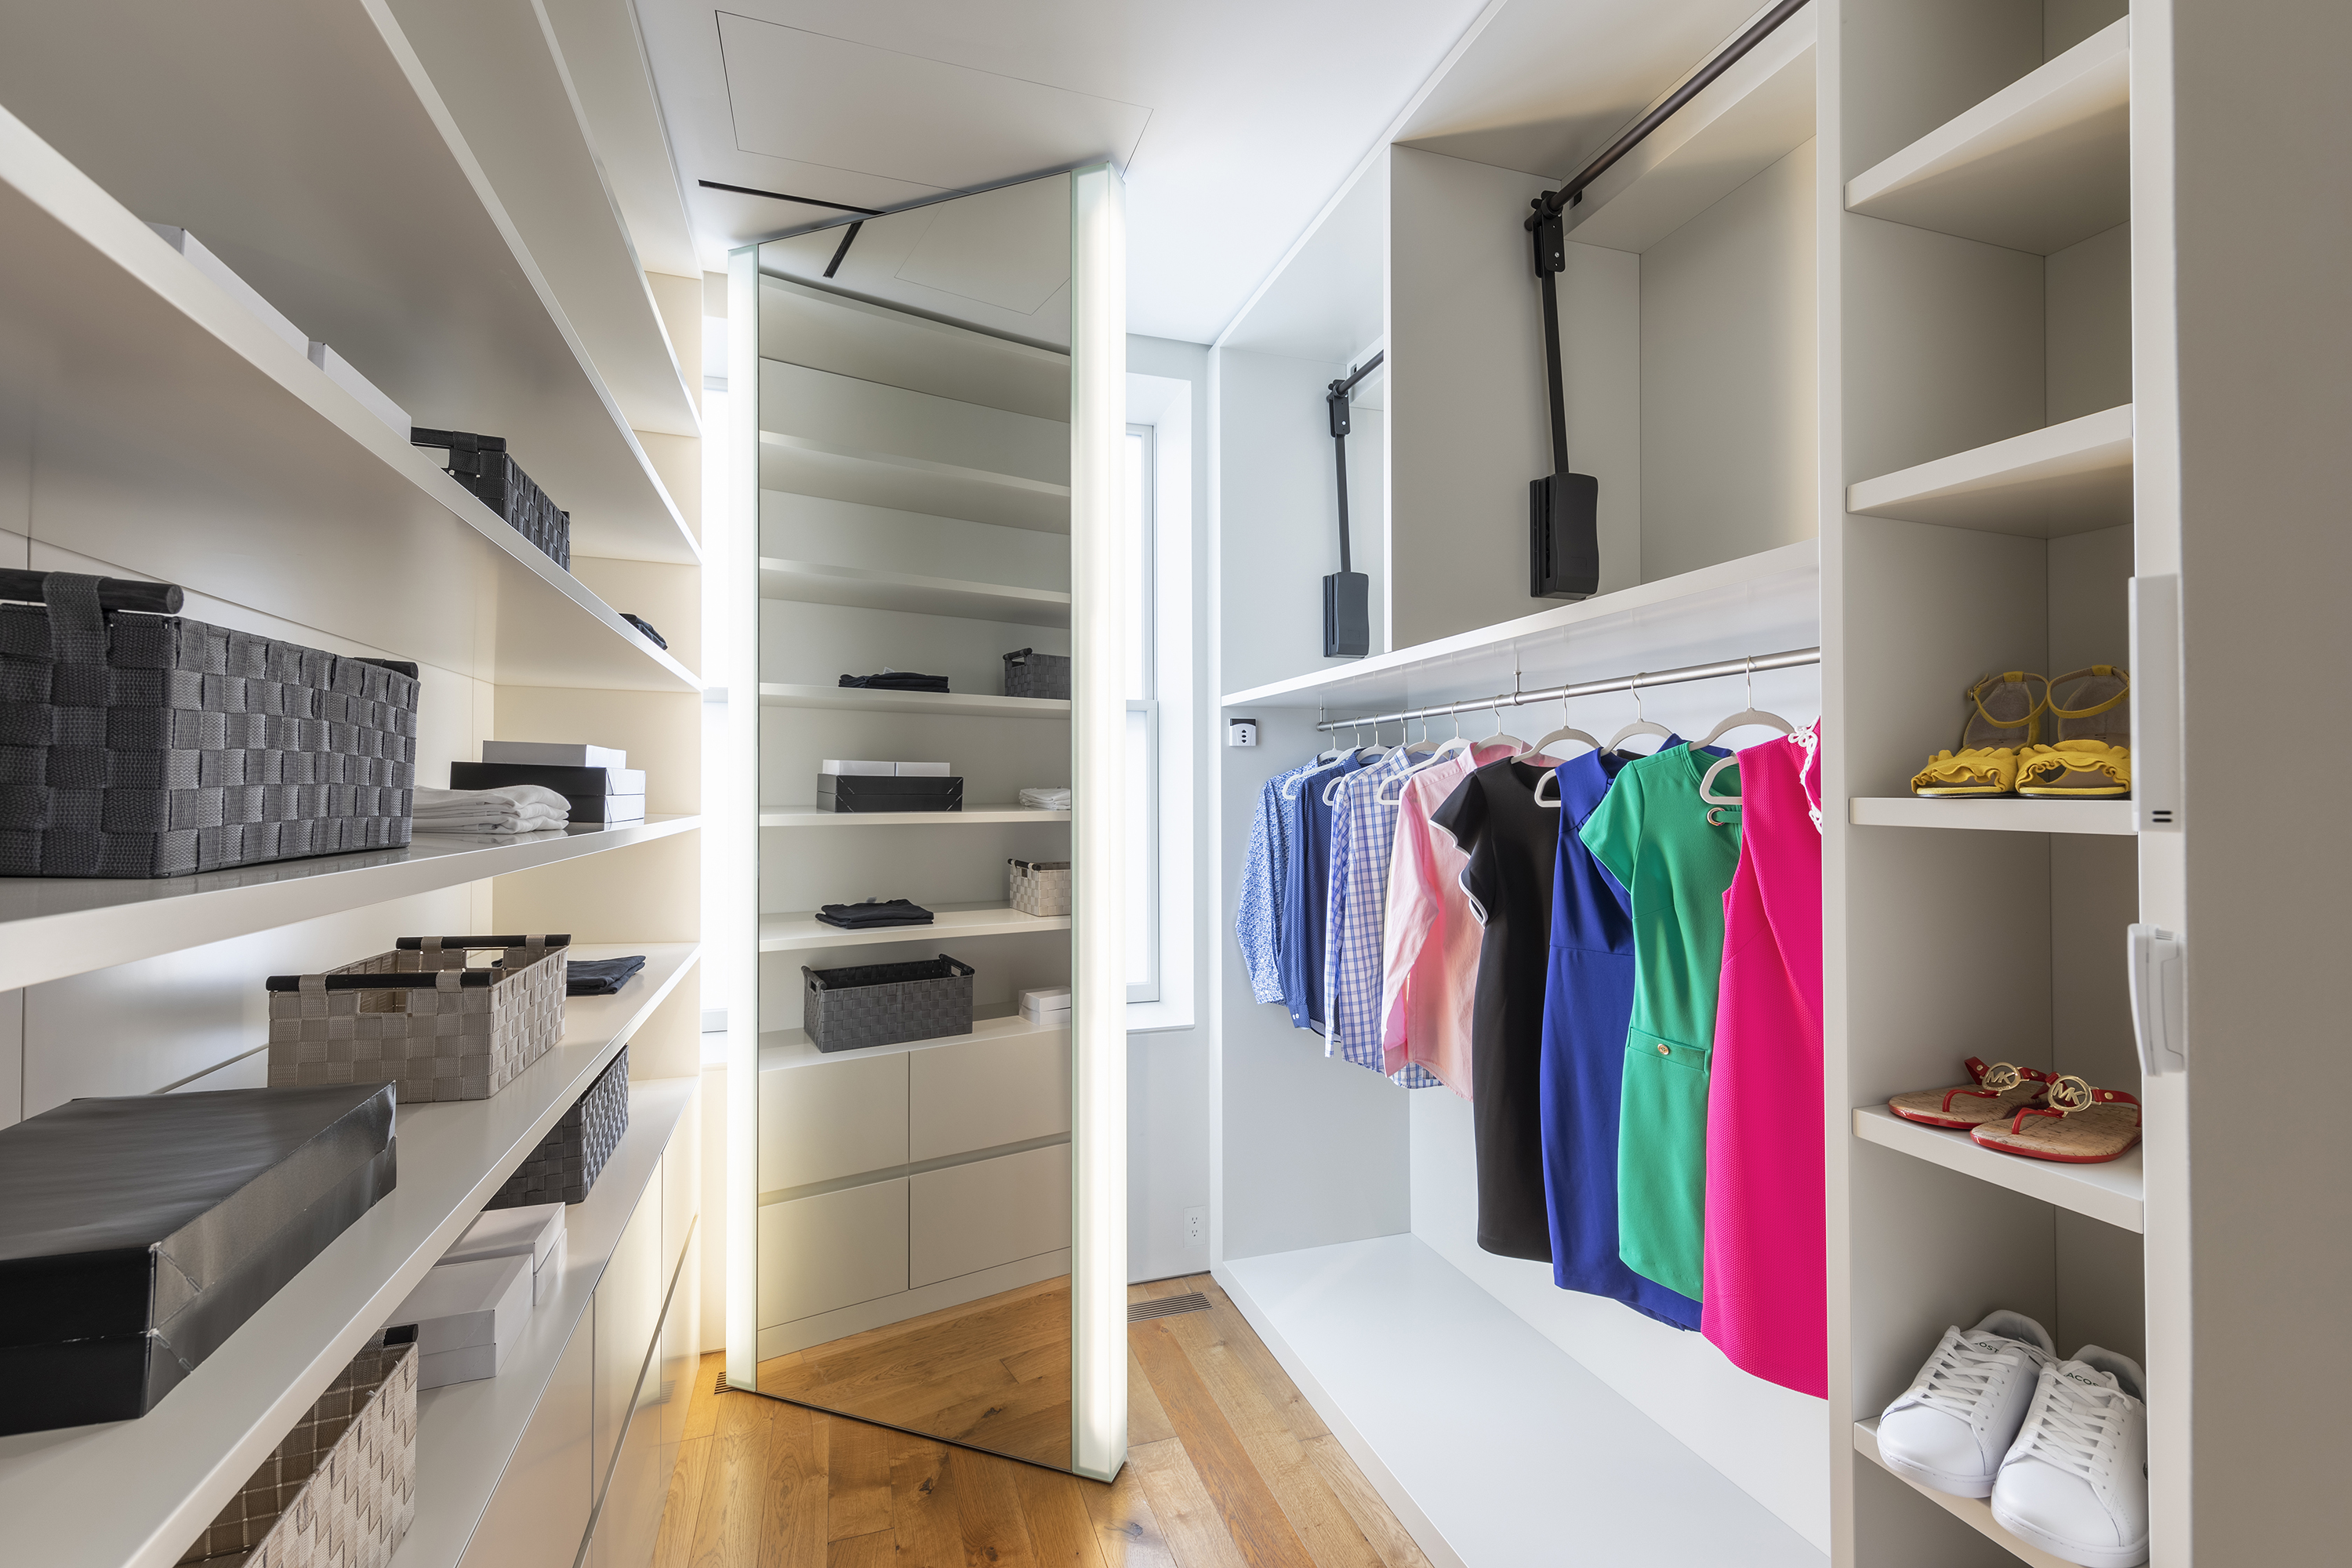 Bins and boxes add to the organization in a primary bedroom closet.